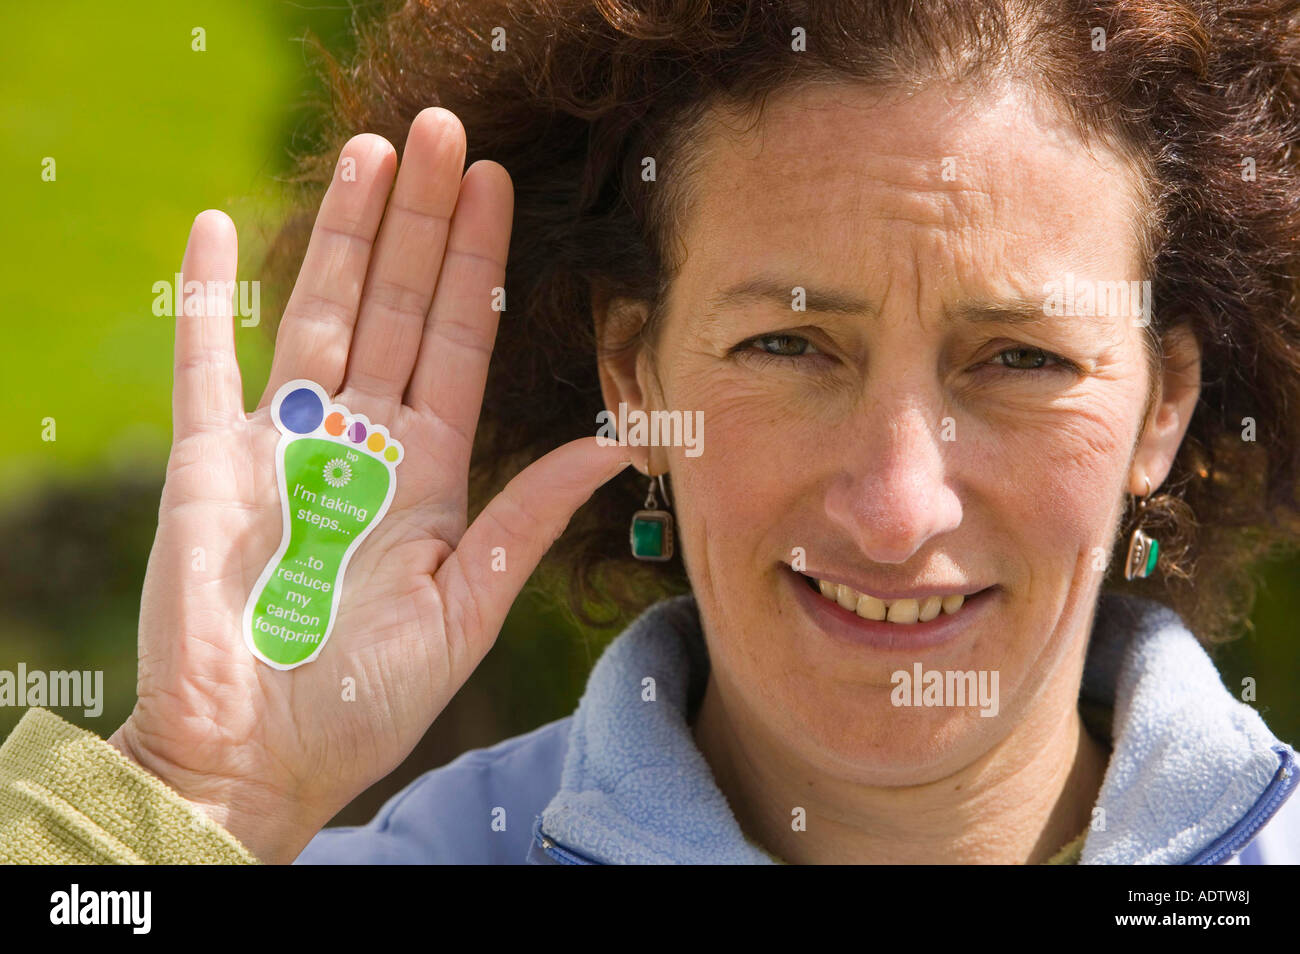 A woman with a sticker about reducing your carbon footprint Stock Photo